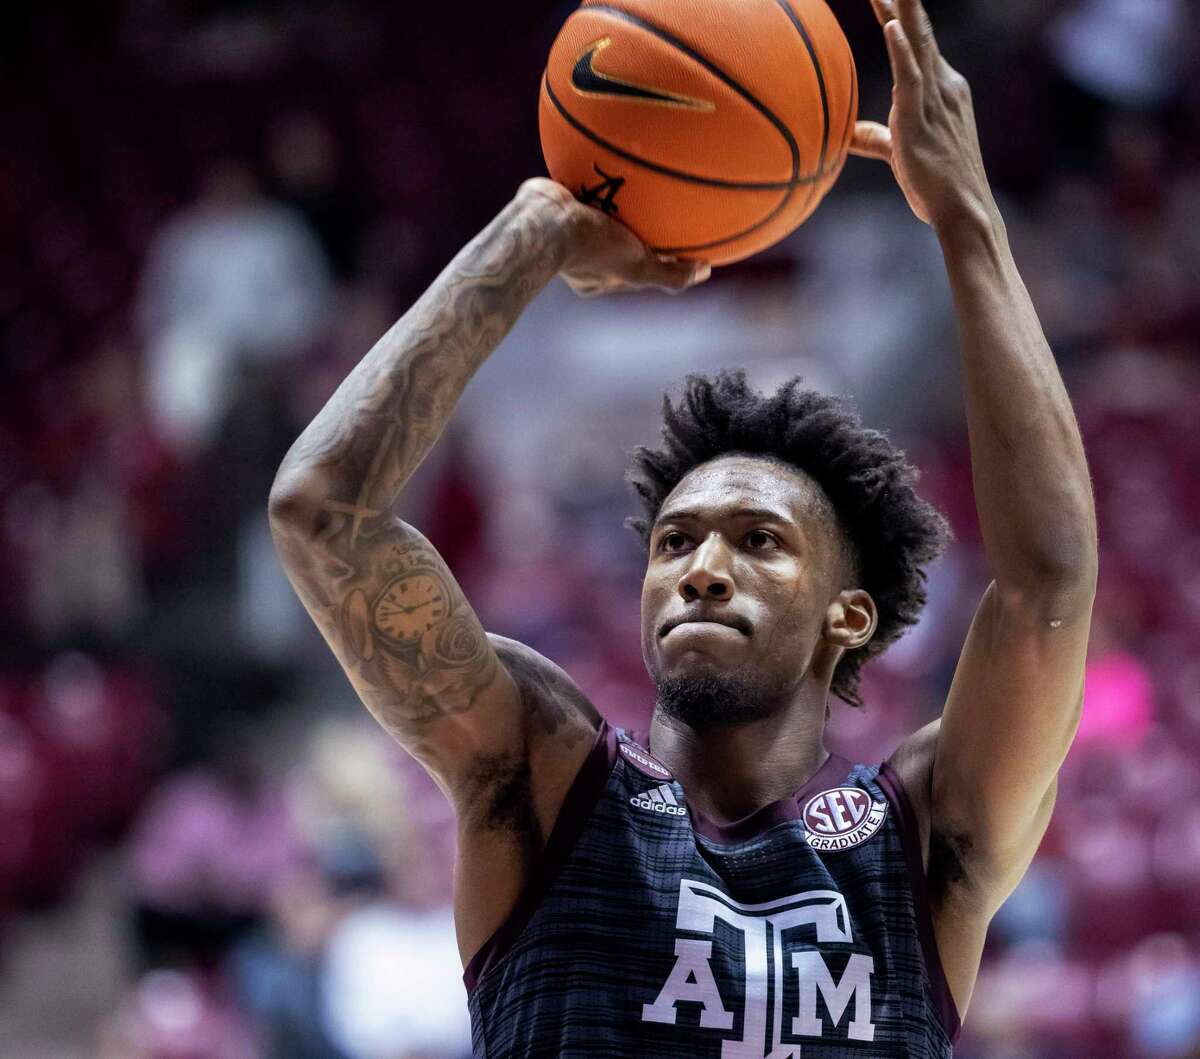 A&M’s Quenton Jackson has been the driving force in a late-season surge that has put the Aggies in position to get noticed by the NCAA selection committee with a strong showing in Tampa.